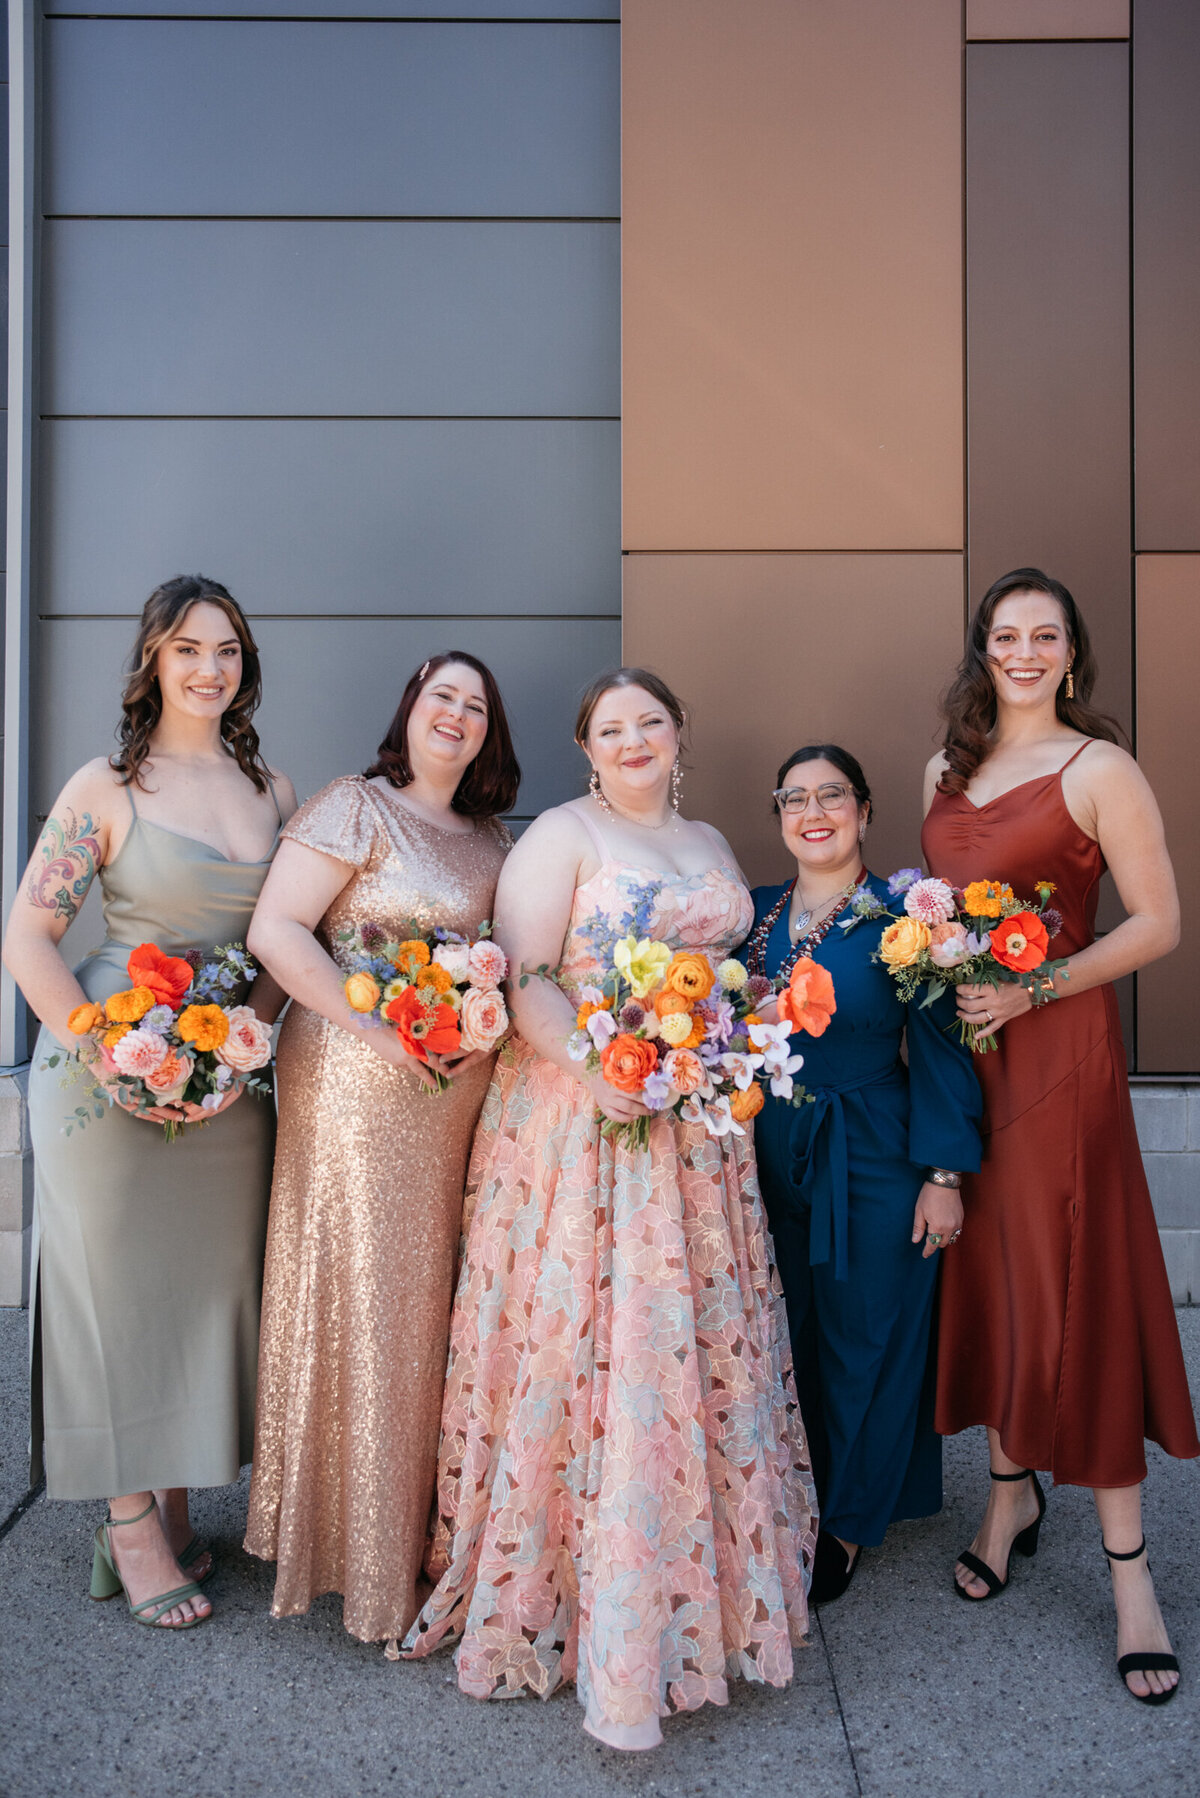 bride wearing colorful wedding dress surrounded by bridesmaids in mismatched colorful bridesmaid dresses